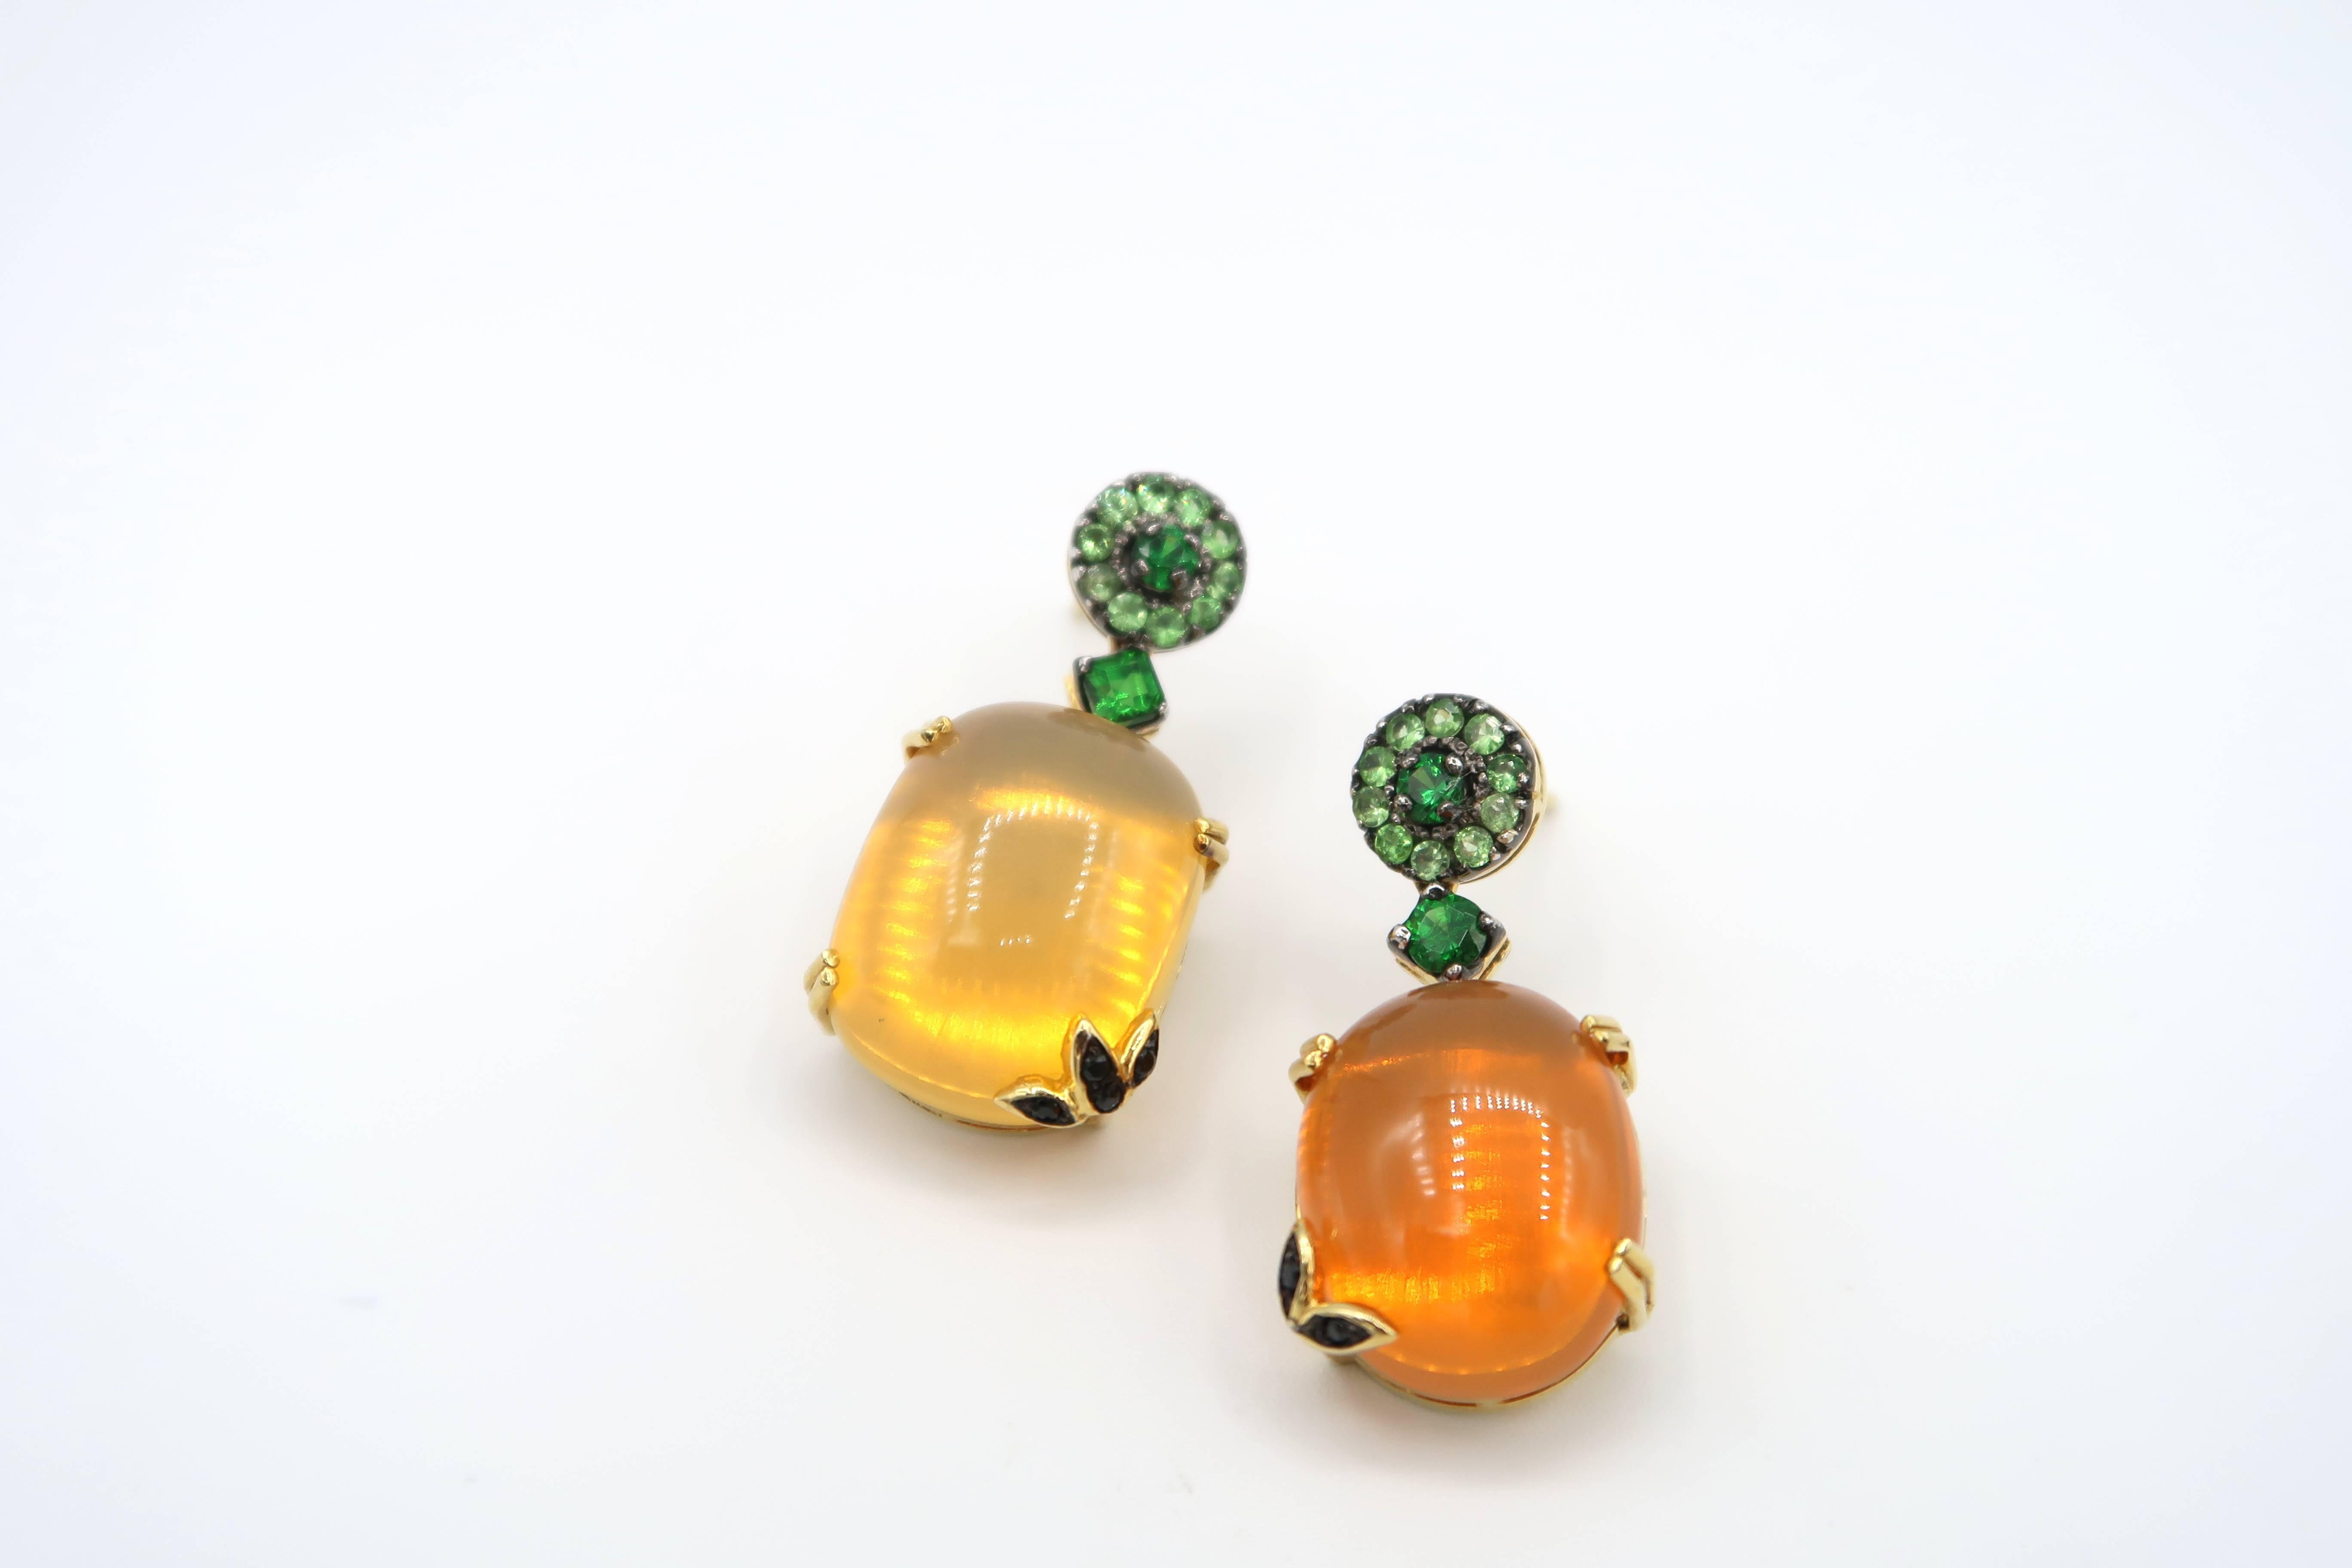 Fire Opal Earrings in 18K Yellow Gold Embellished with Tsavorite and Black Diamond Leaves. Suitable for pierced ears. This piece comes with a complimentary international shipping.

Gold: 9.99g. 18K yellow gold
Fire Opal: 17.32ct.
Tsavorite: